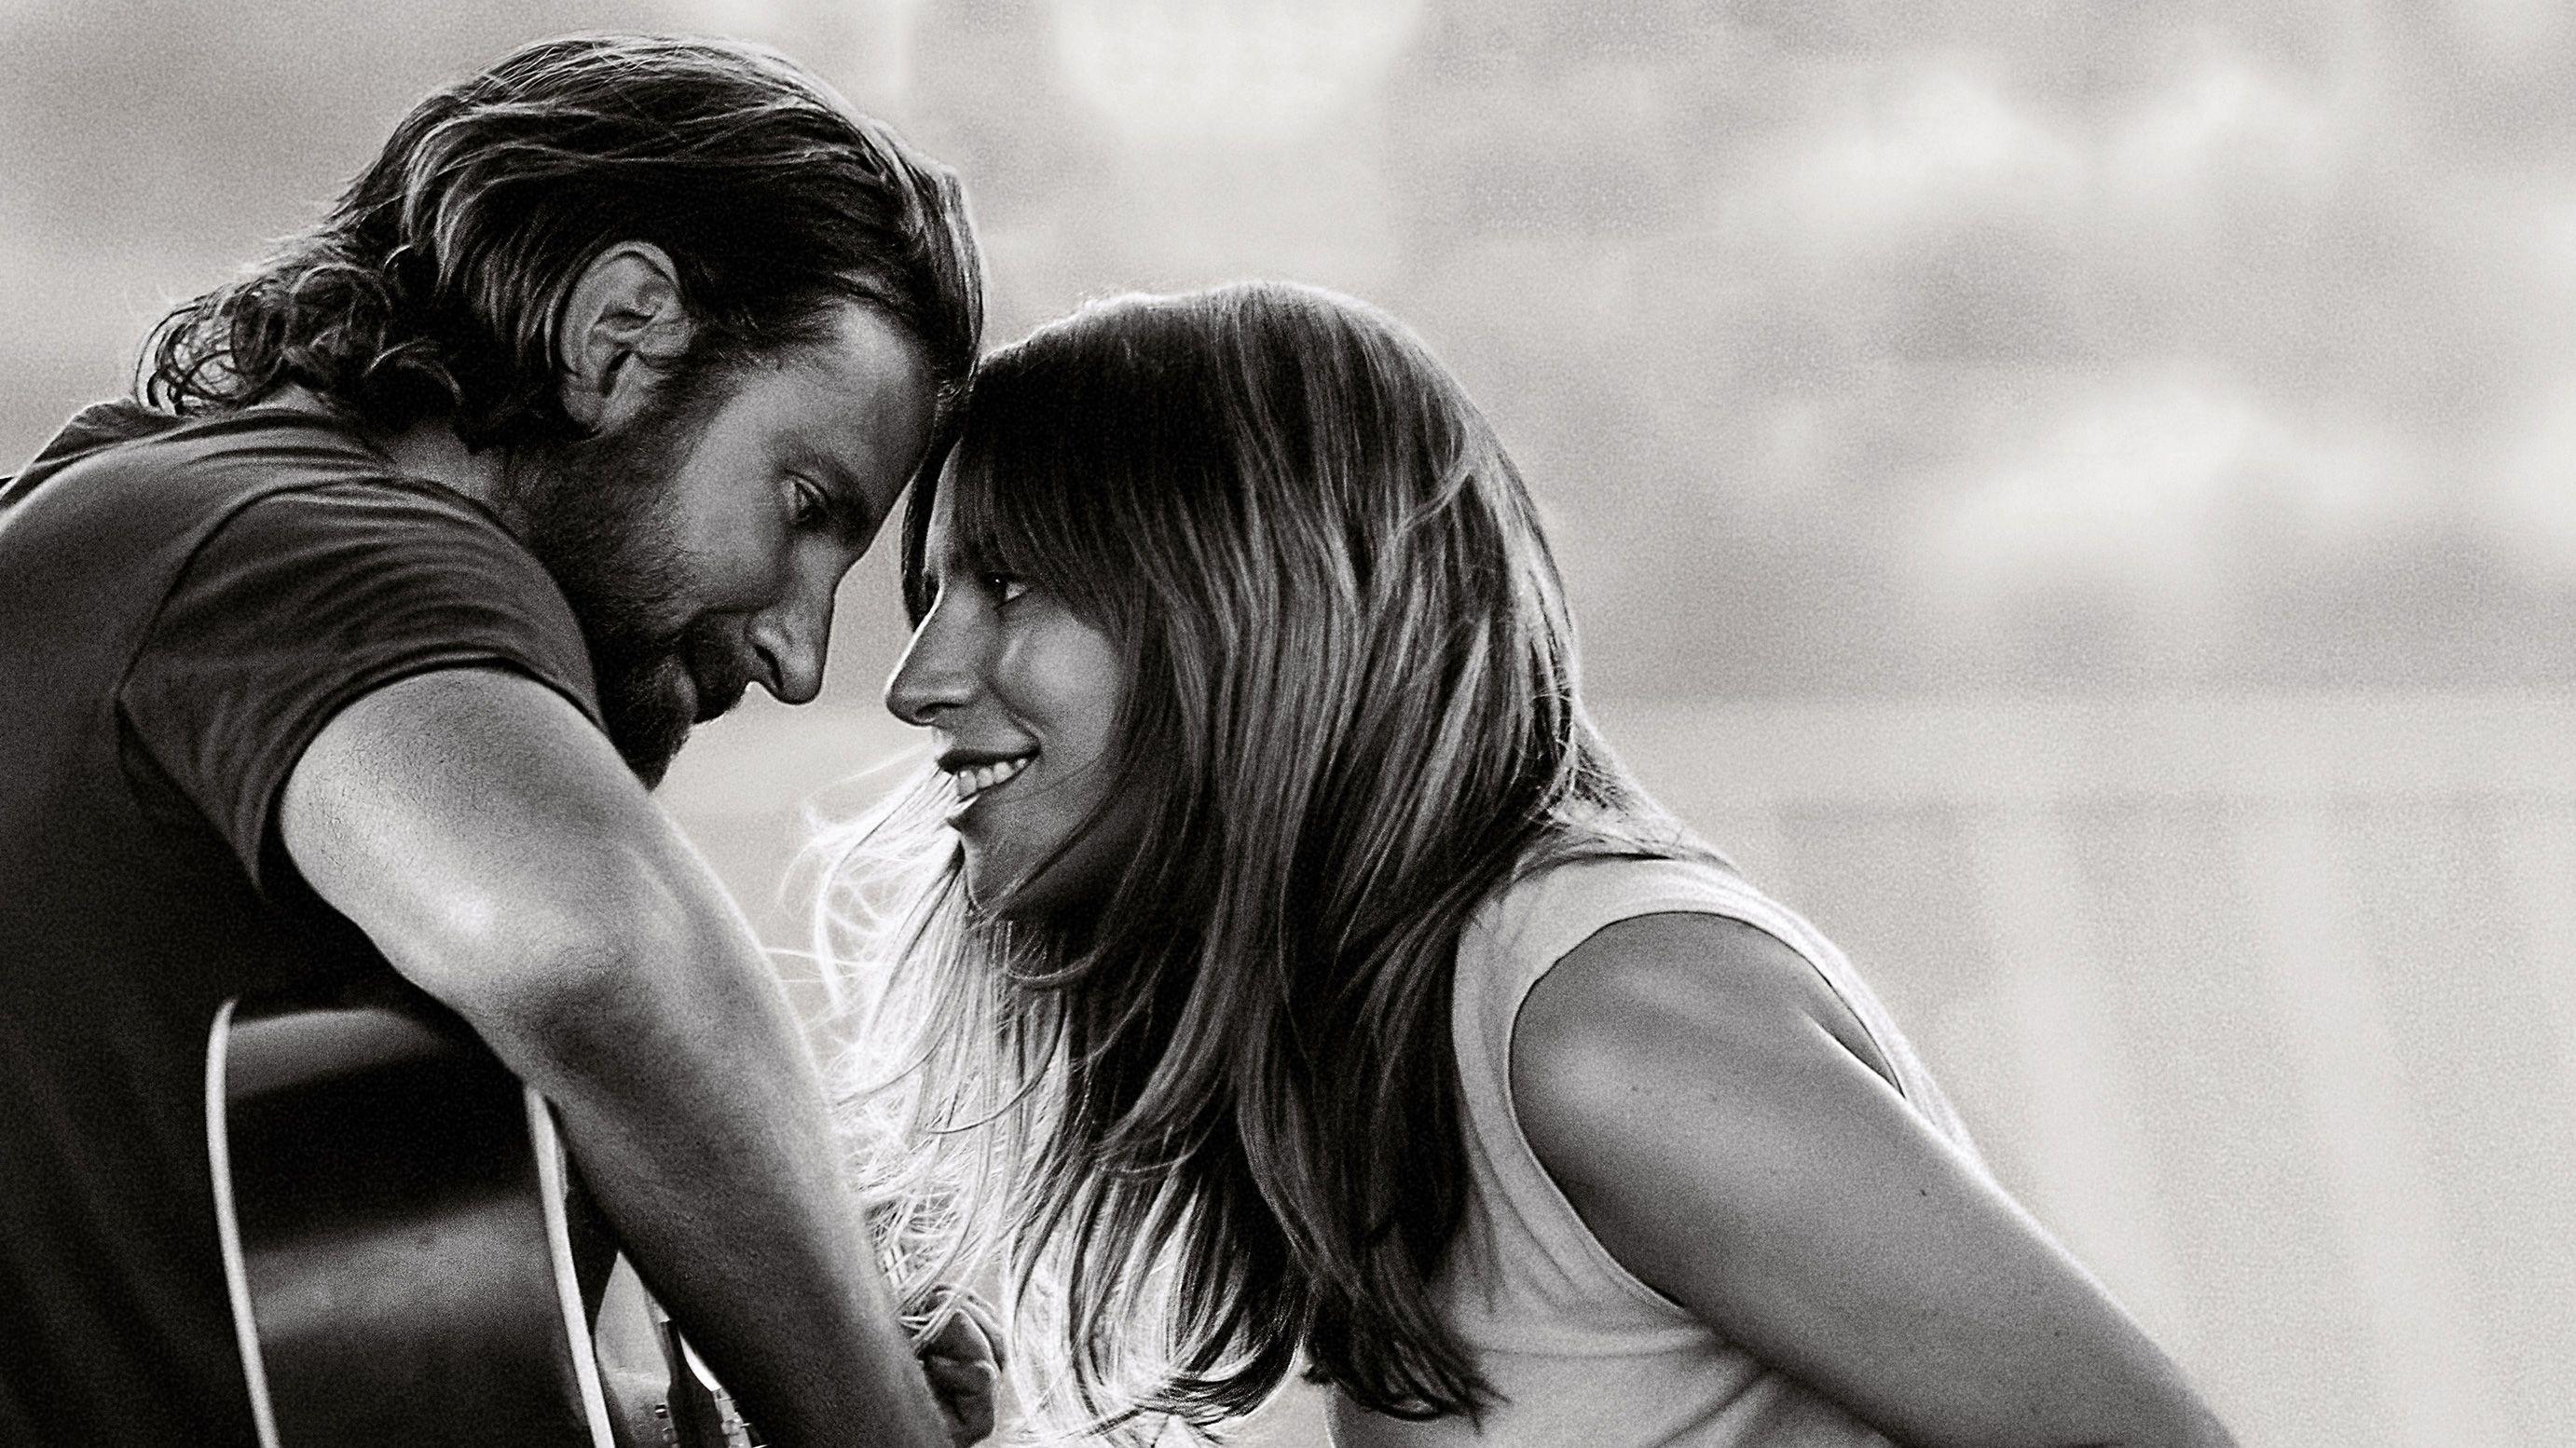 A Star Is Born Movie Poster, HD Movies, 4k Wallpaper, Image